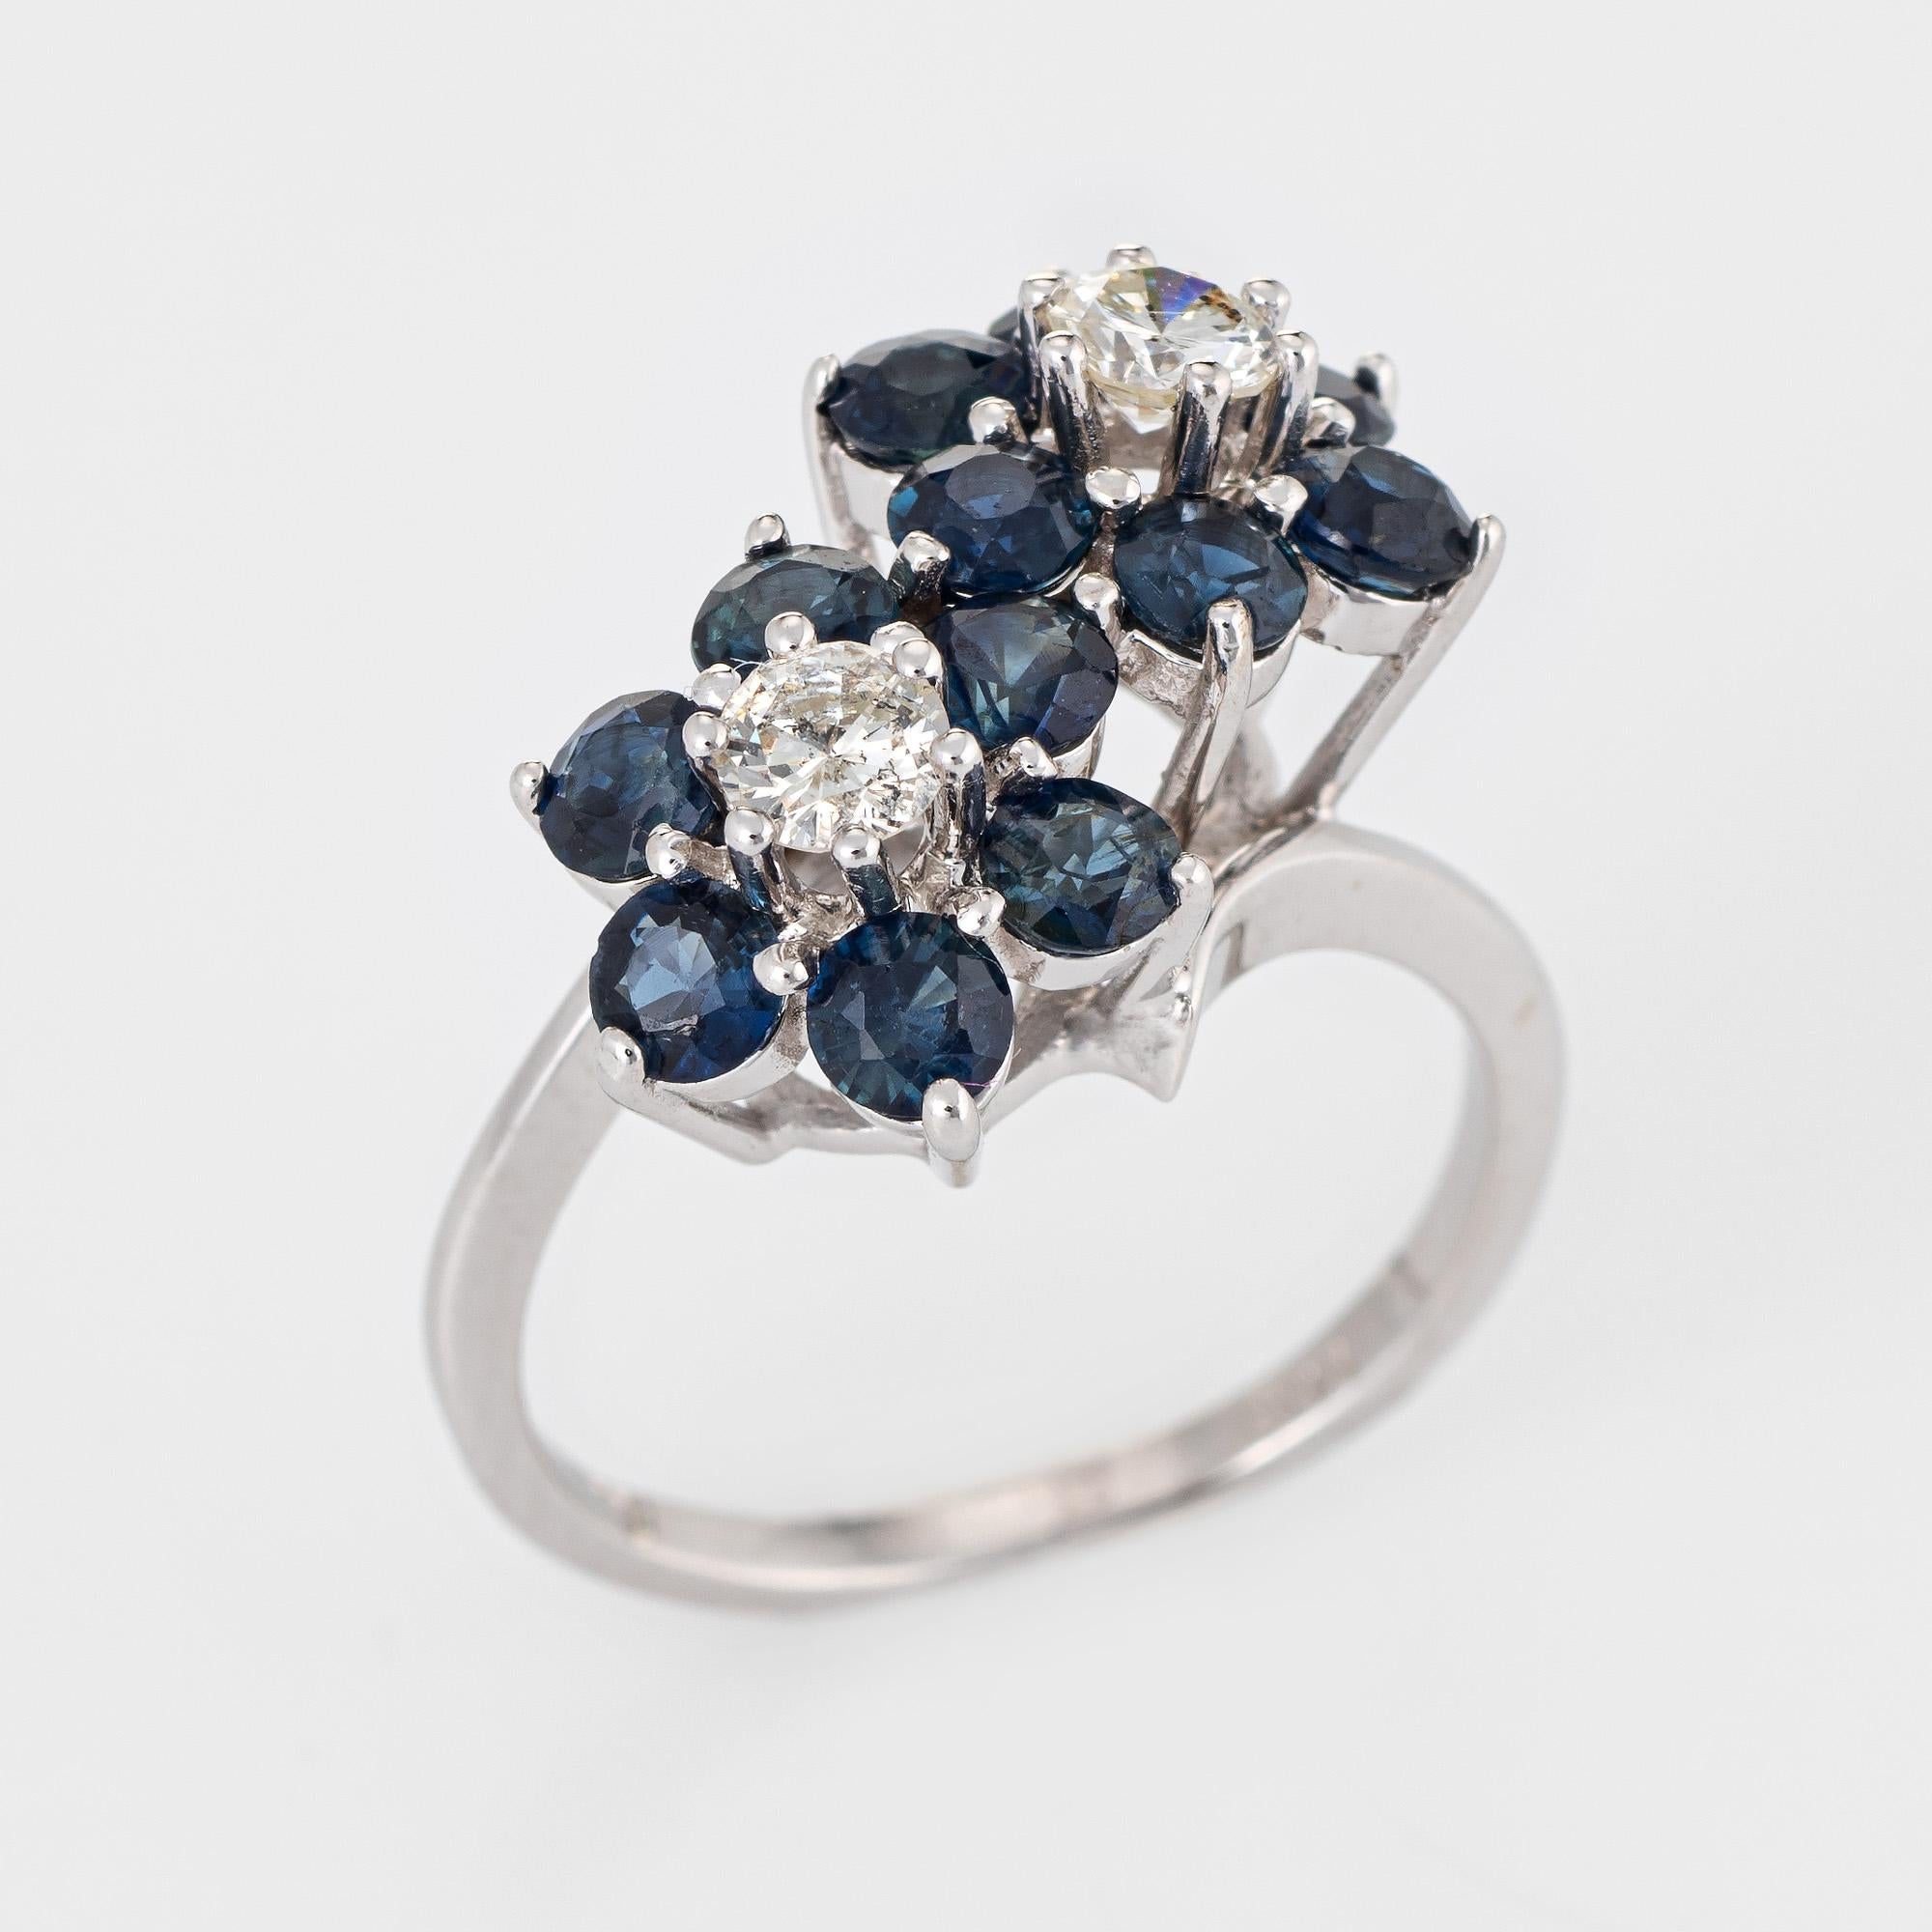 Finely detailed vintage sapphire & diamond double flower ring crafted in 14k white gold. 

Two estimated 0.20 carat (each) round brilliant cut diamonds total an estimated 0.40 carats (estimated at H-I color and SI2 clarity). 12 sapphires are